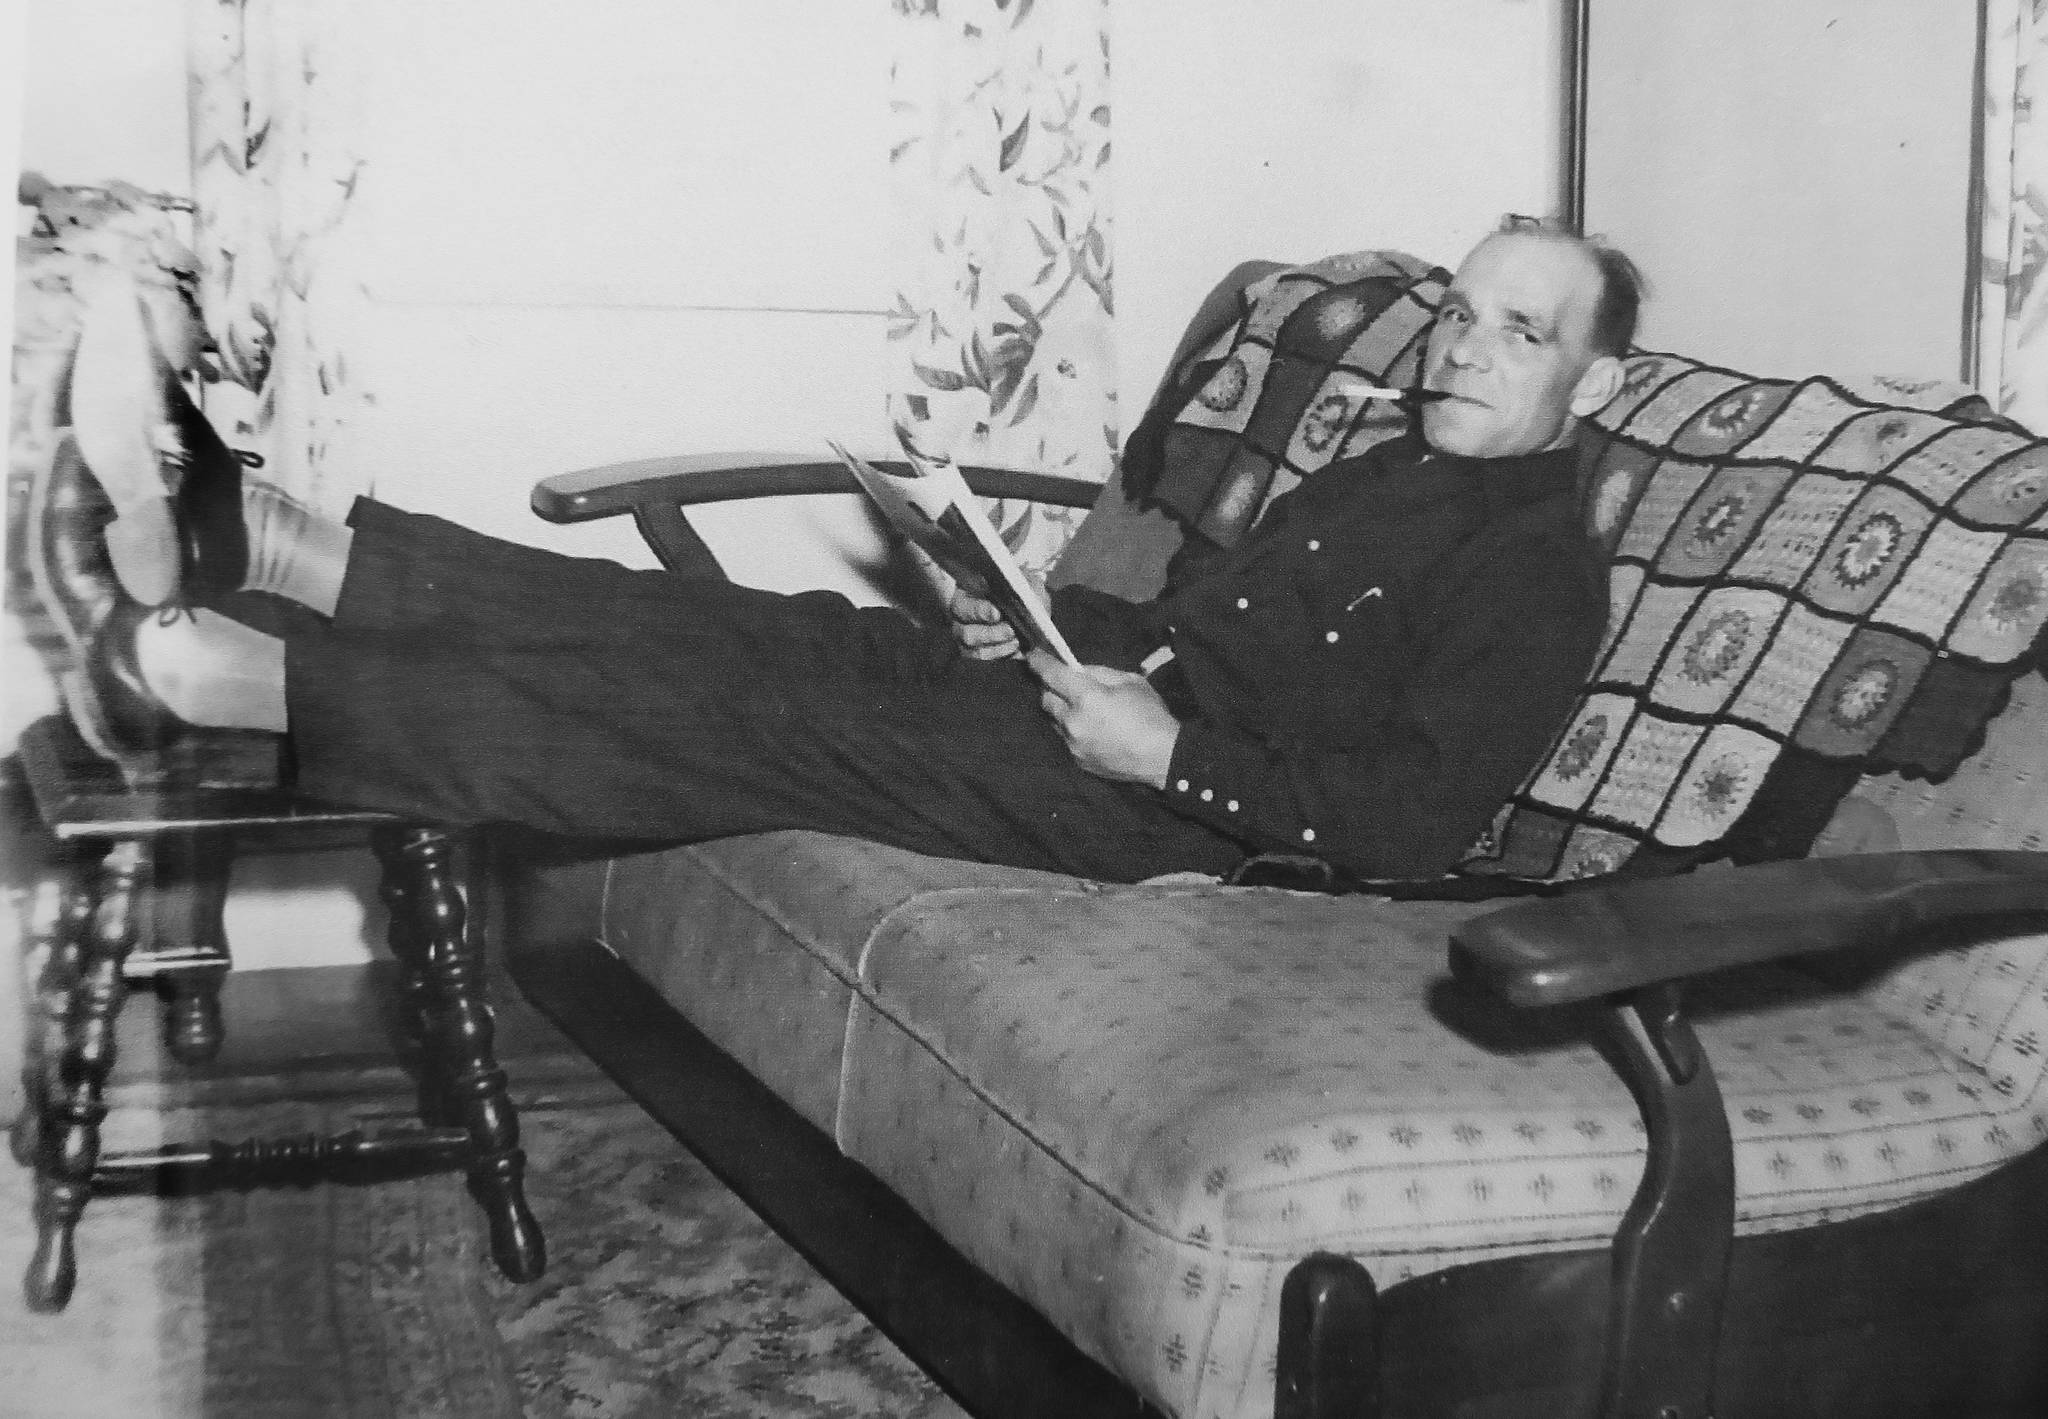 Little Jim relaxes at home, circa 1950. (Photo courtesy of Mona Painter)